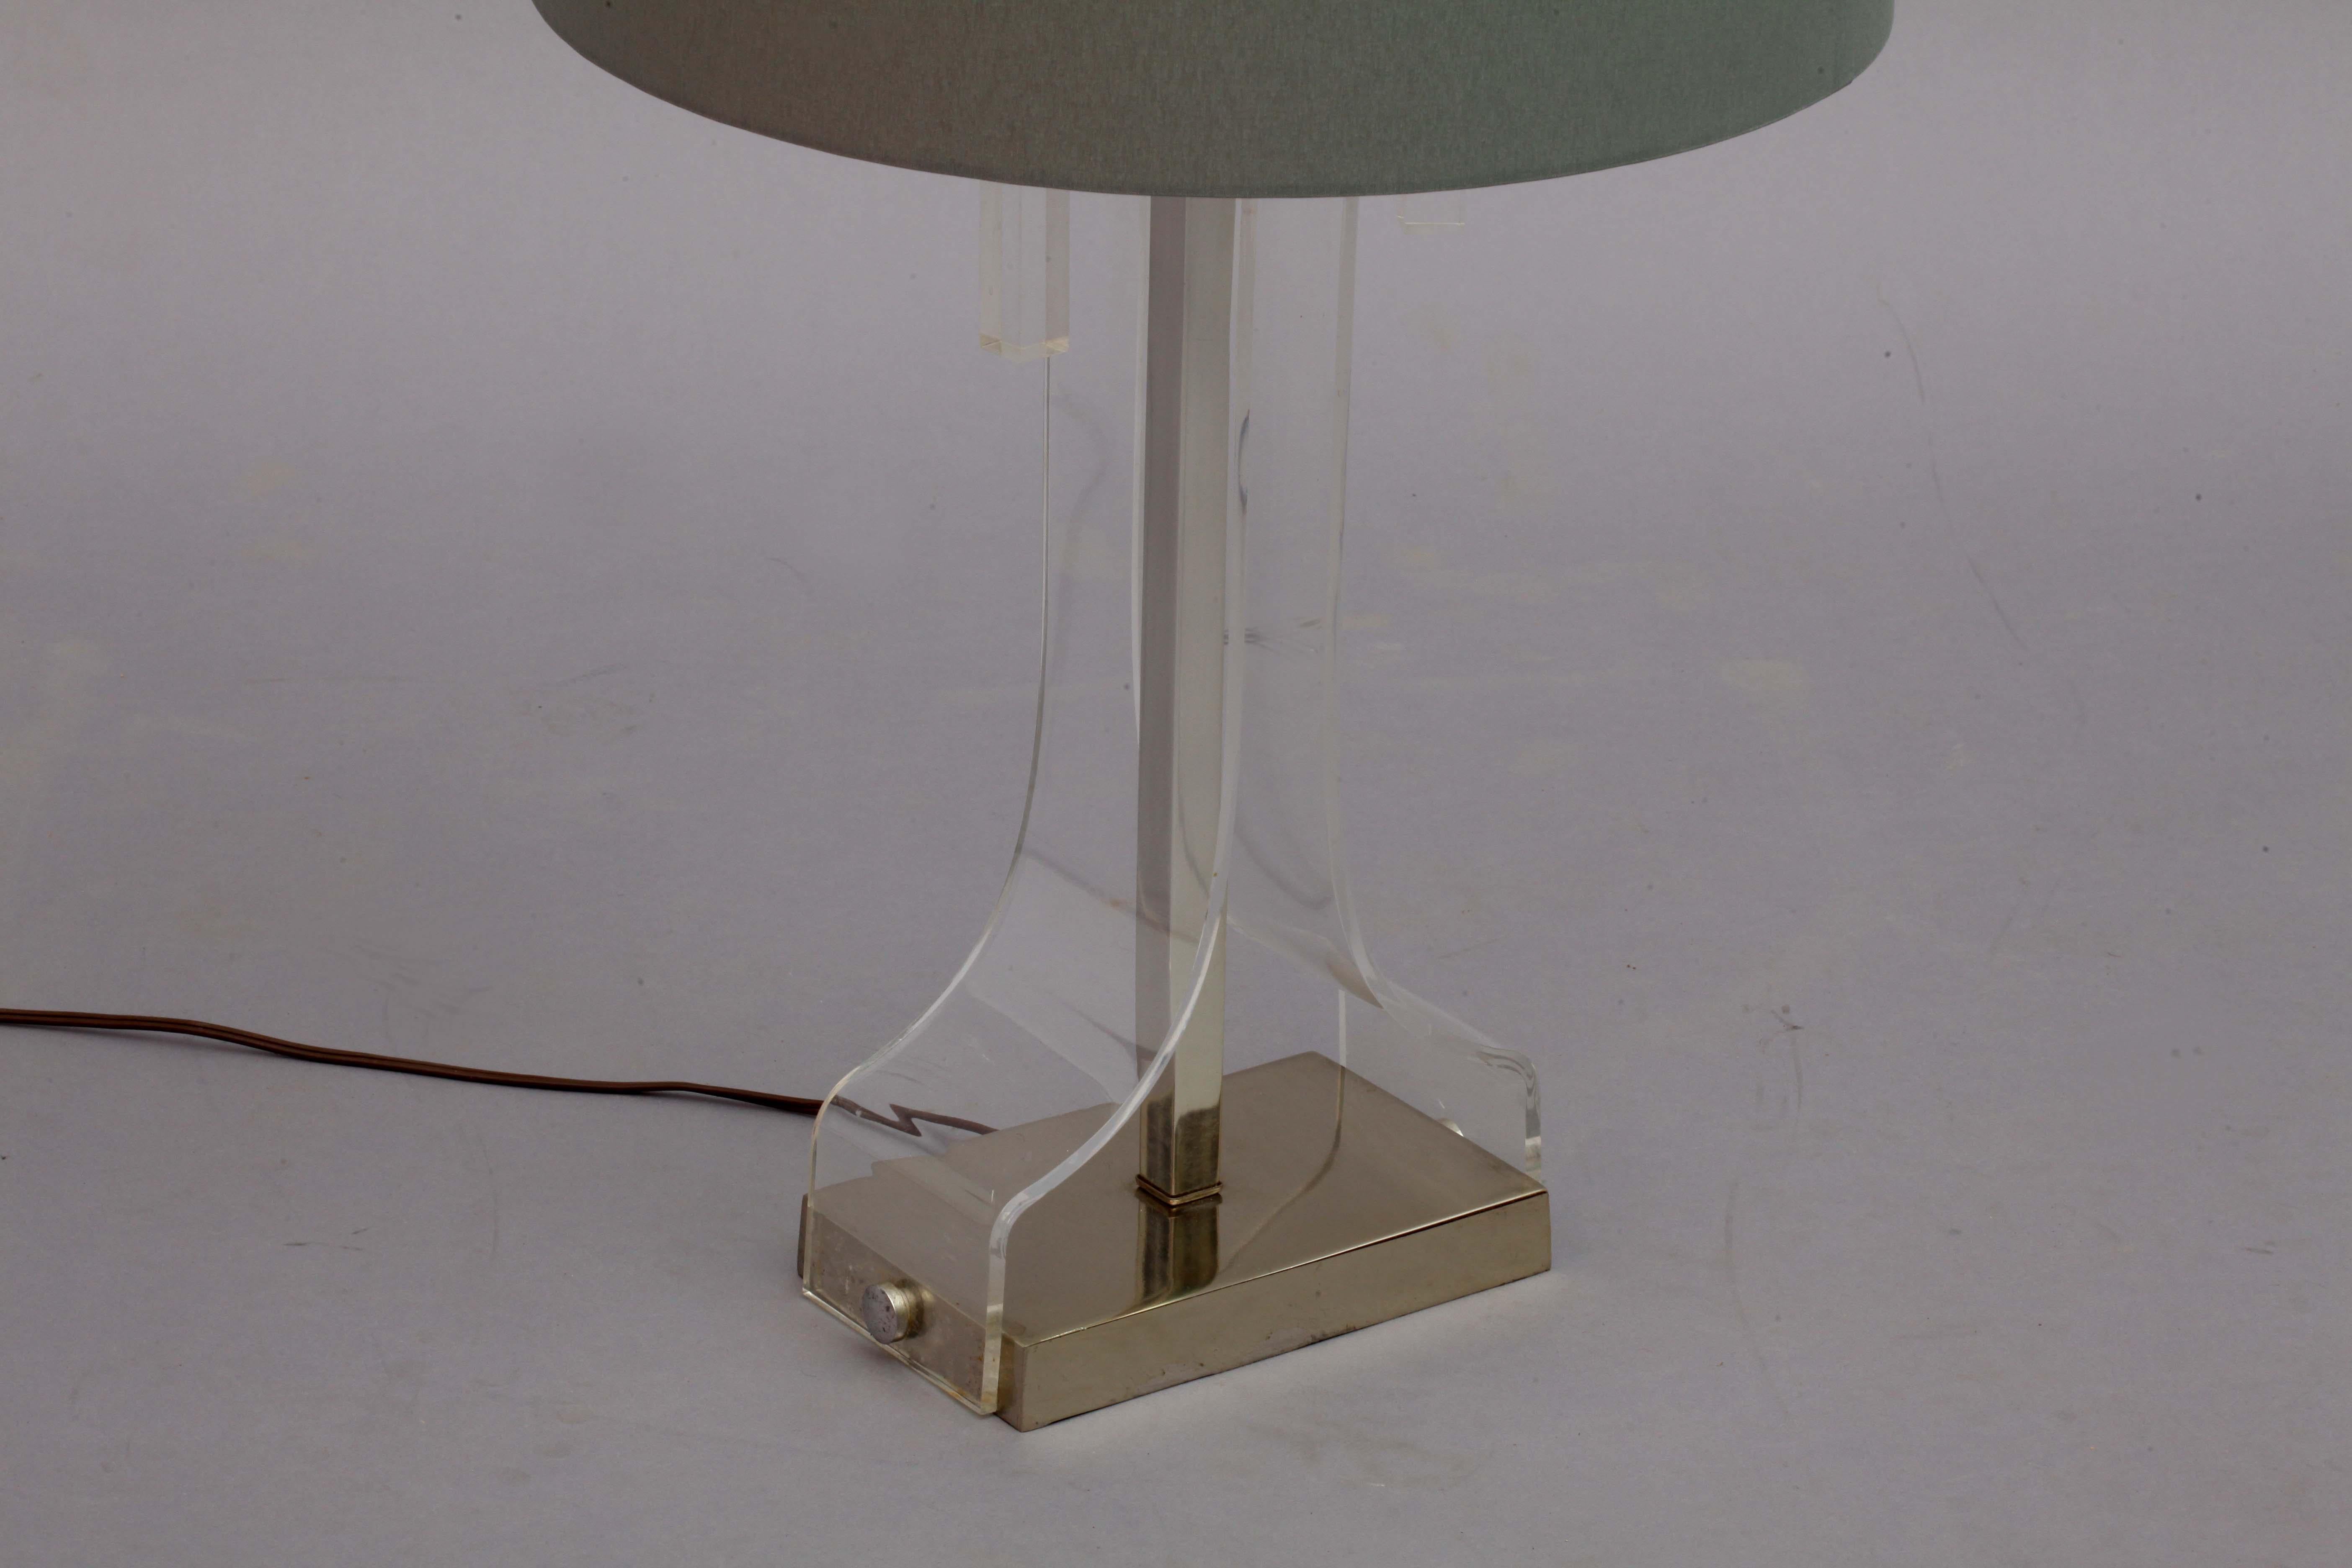 Table lamp,
Italy, 1970
Lucite, chrome, fabric shade.